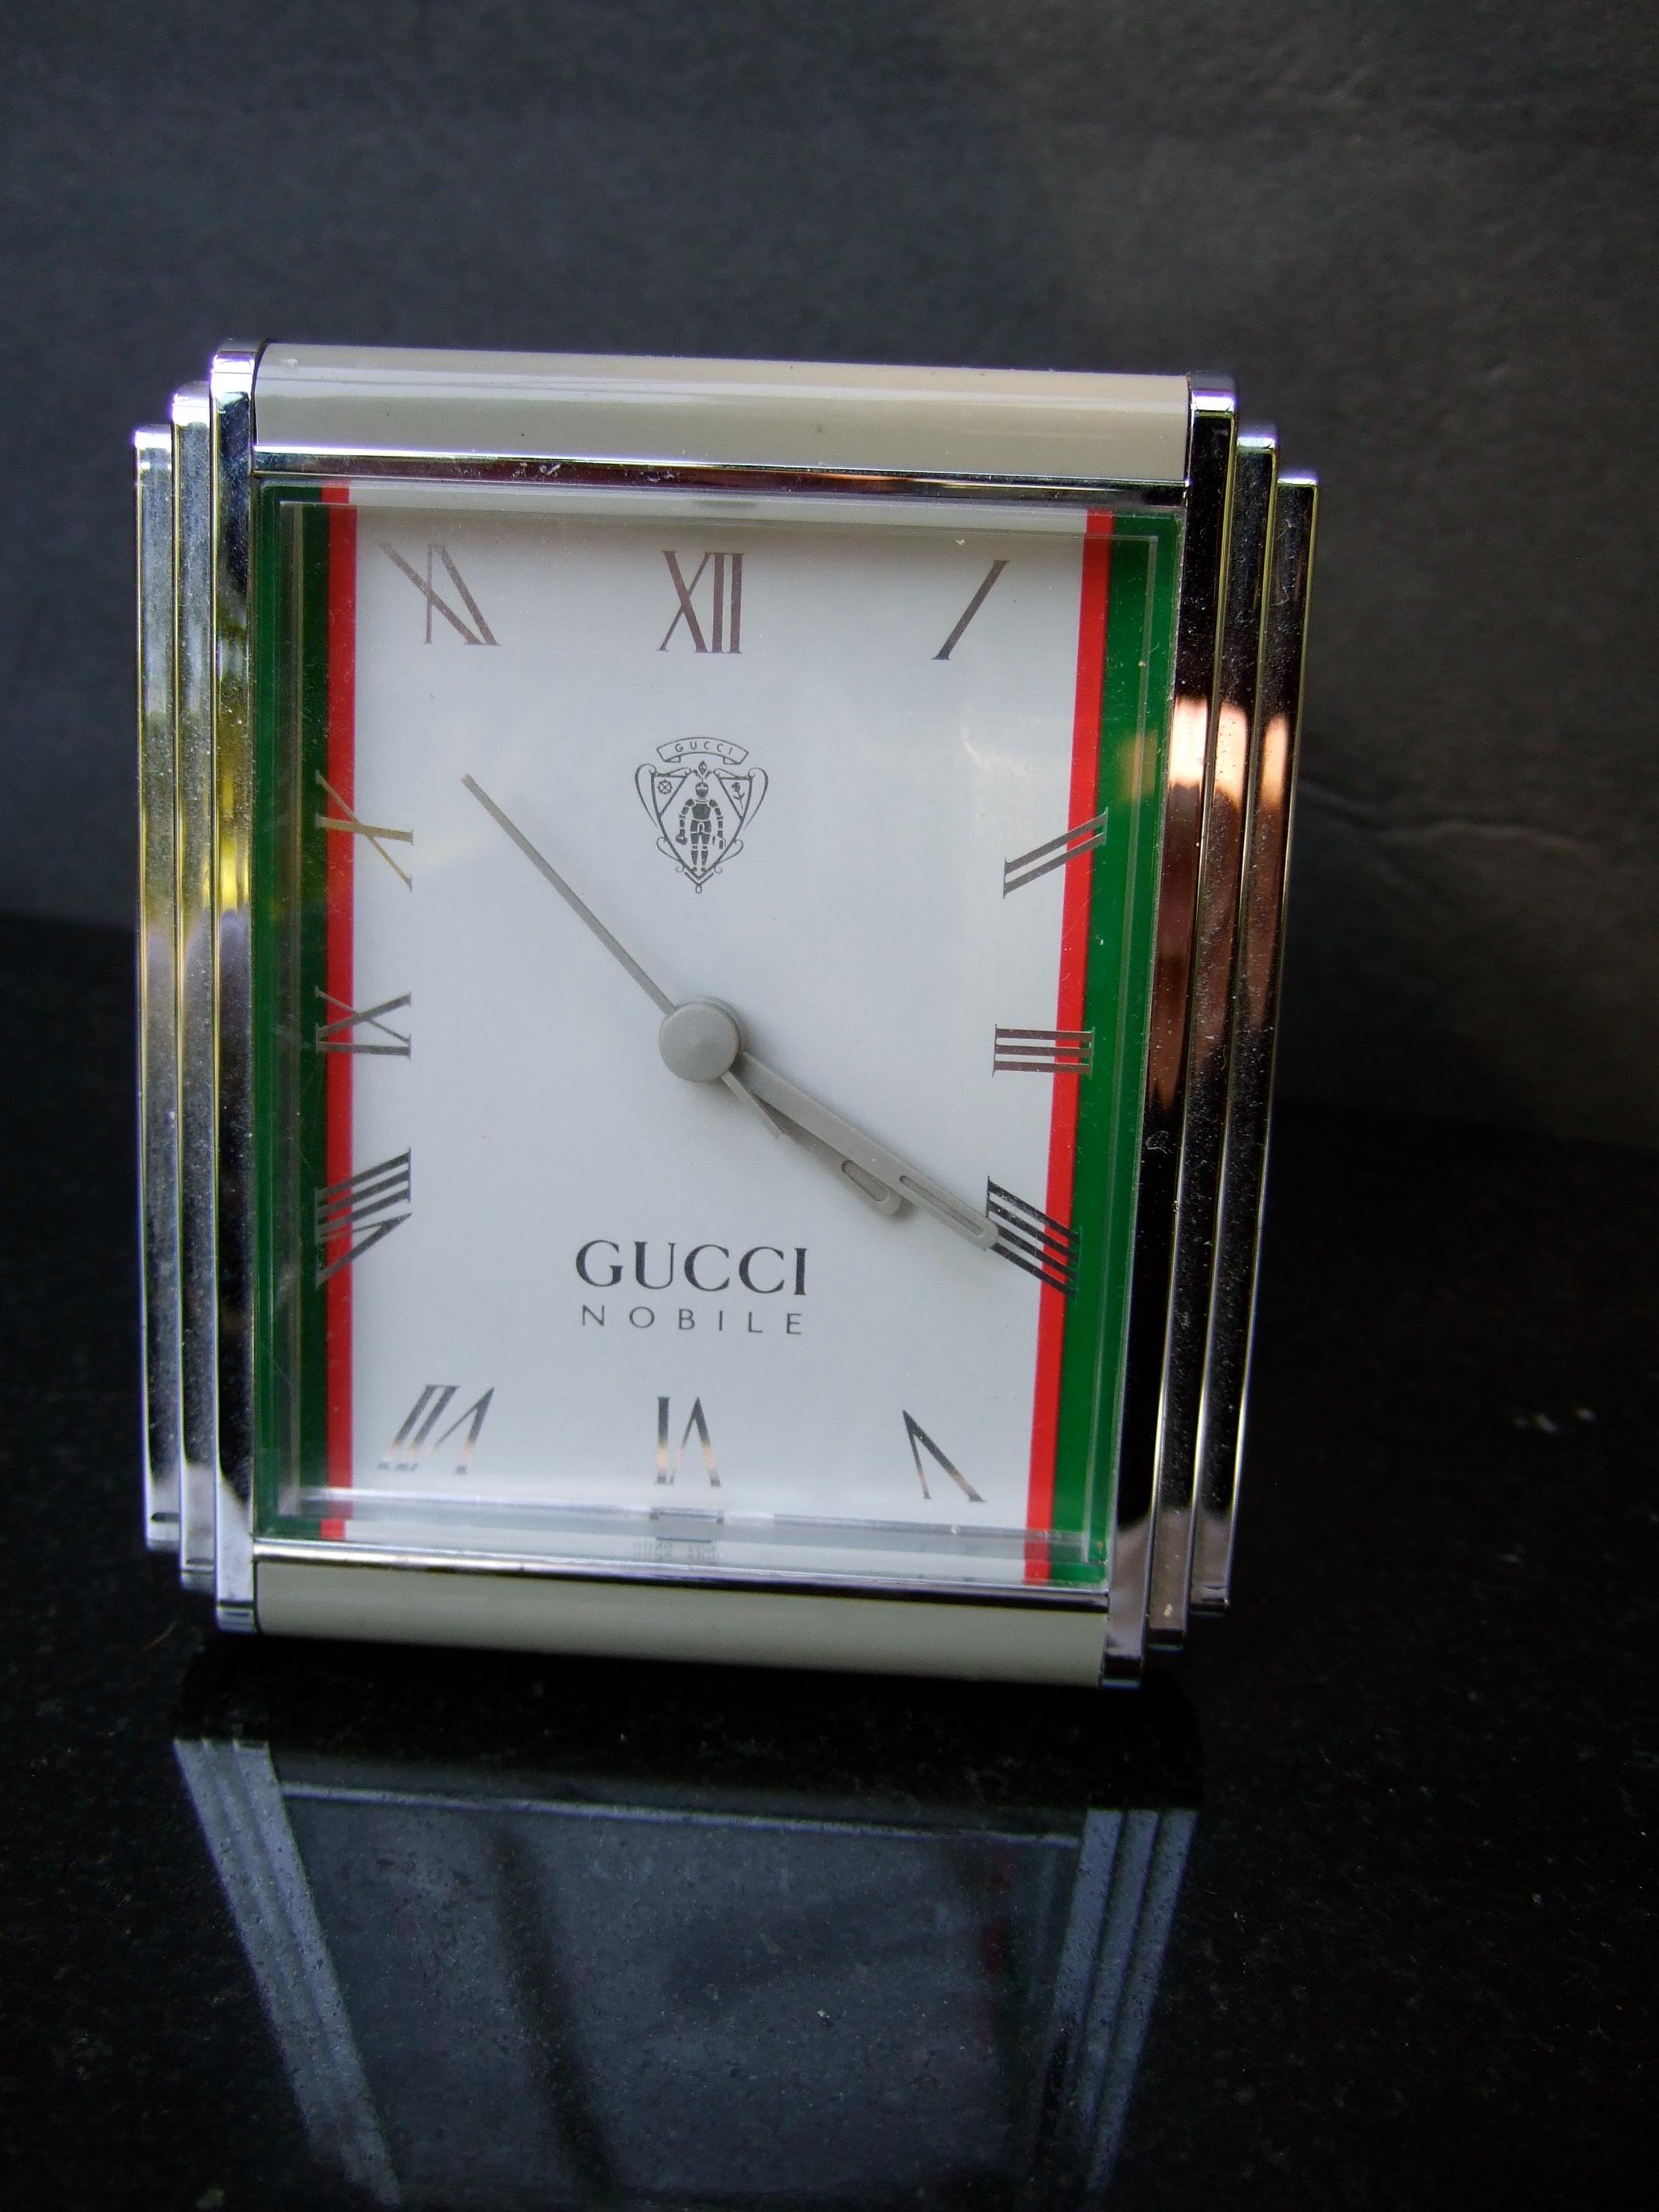 Gucci Nobile silver metallic plastic resin framed battery operated table clock c 1980s
The small table clock is placed in an art deco inspired silver metallic molded
plastic frame that emulates metal. The dial is framed with red & green enamel